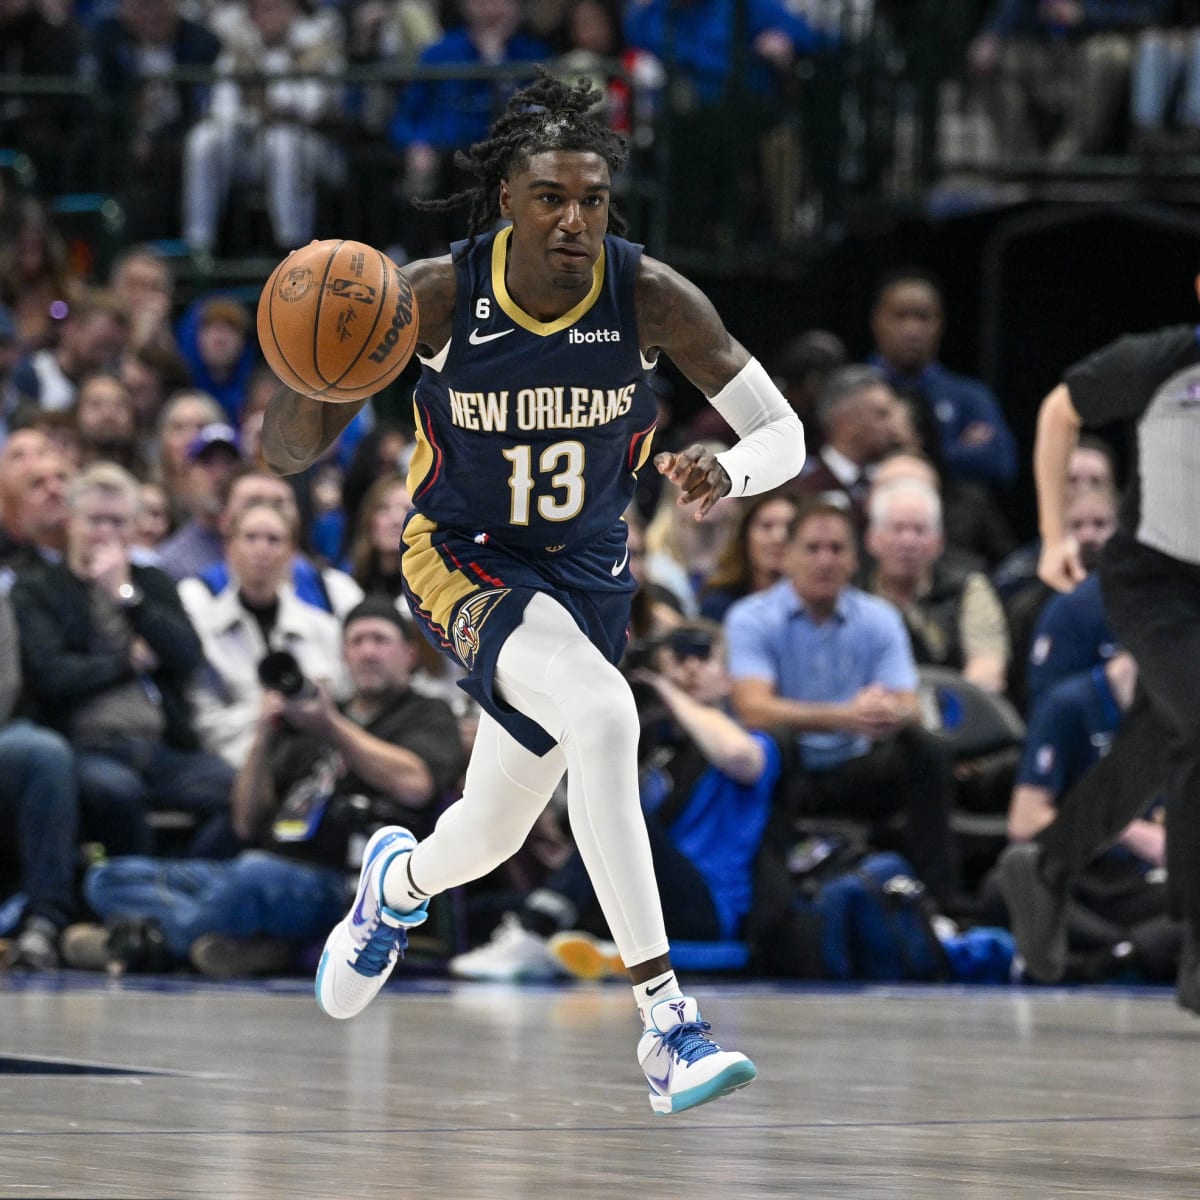 Iimprovement of Kira Lewis shows where Pelicans are headed